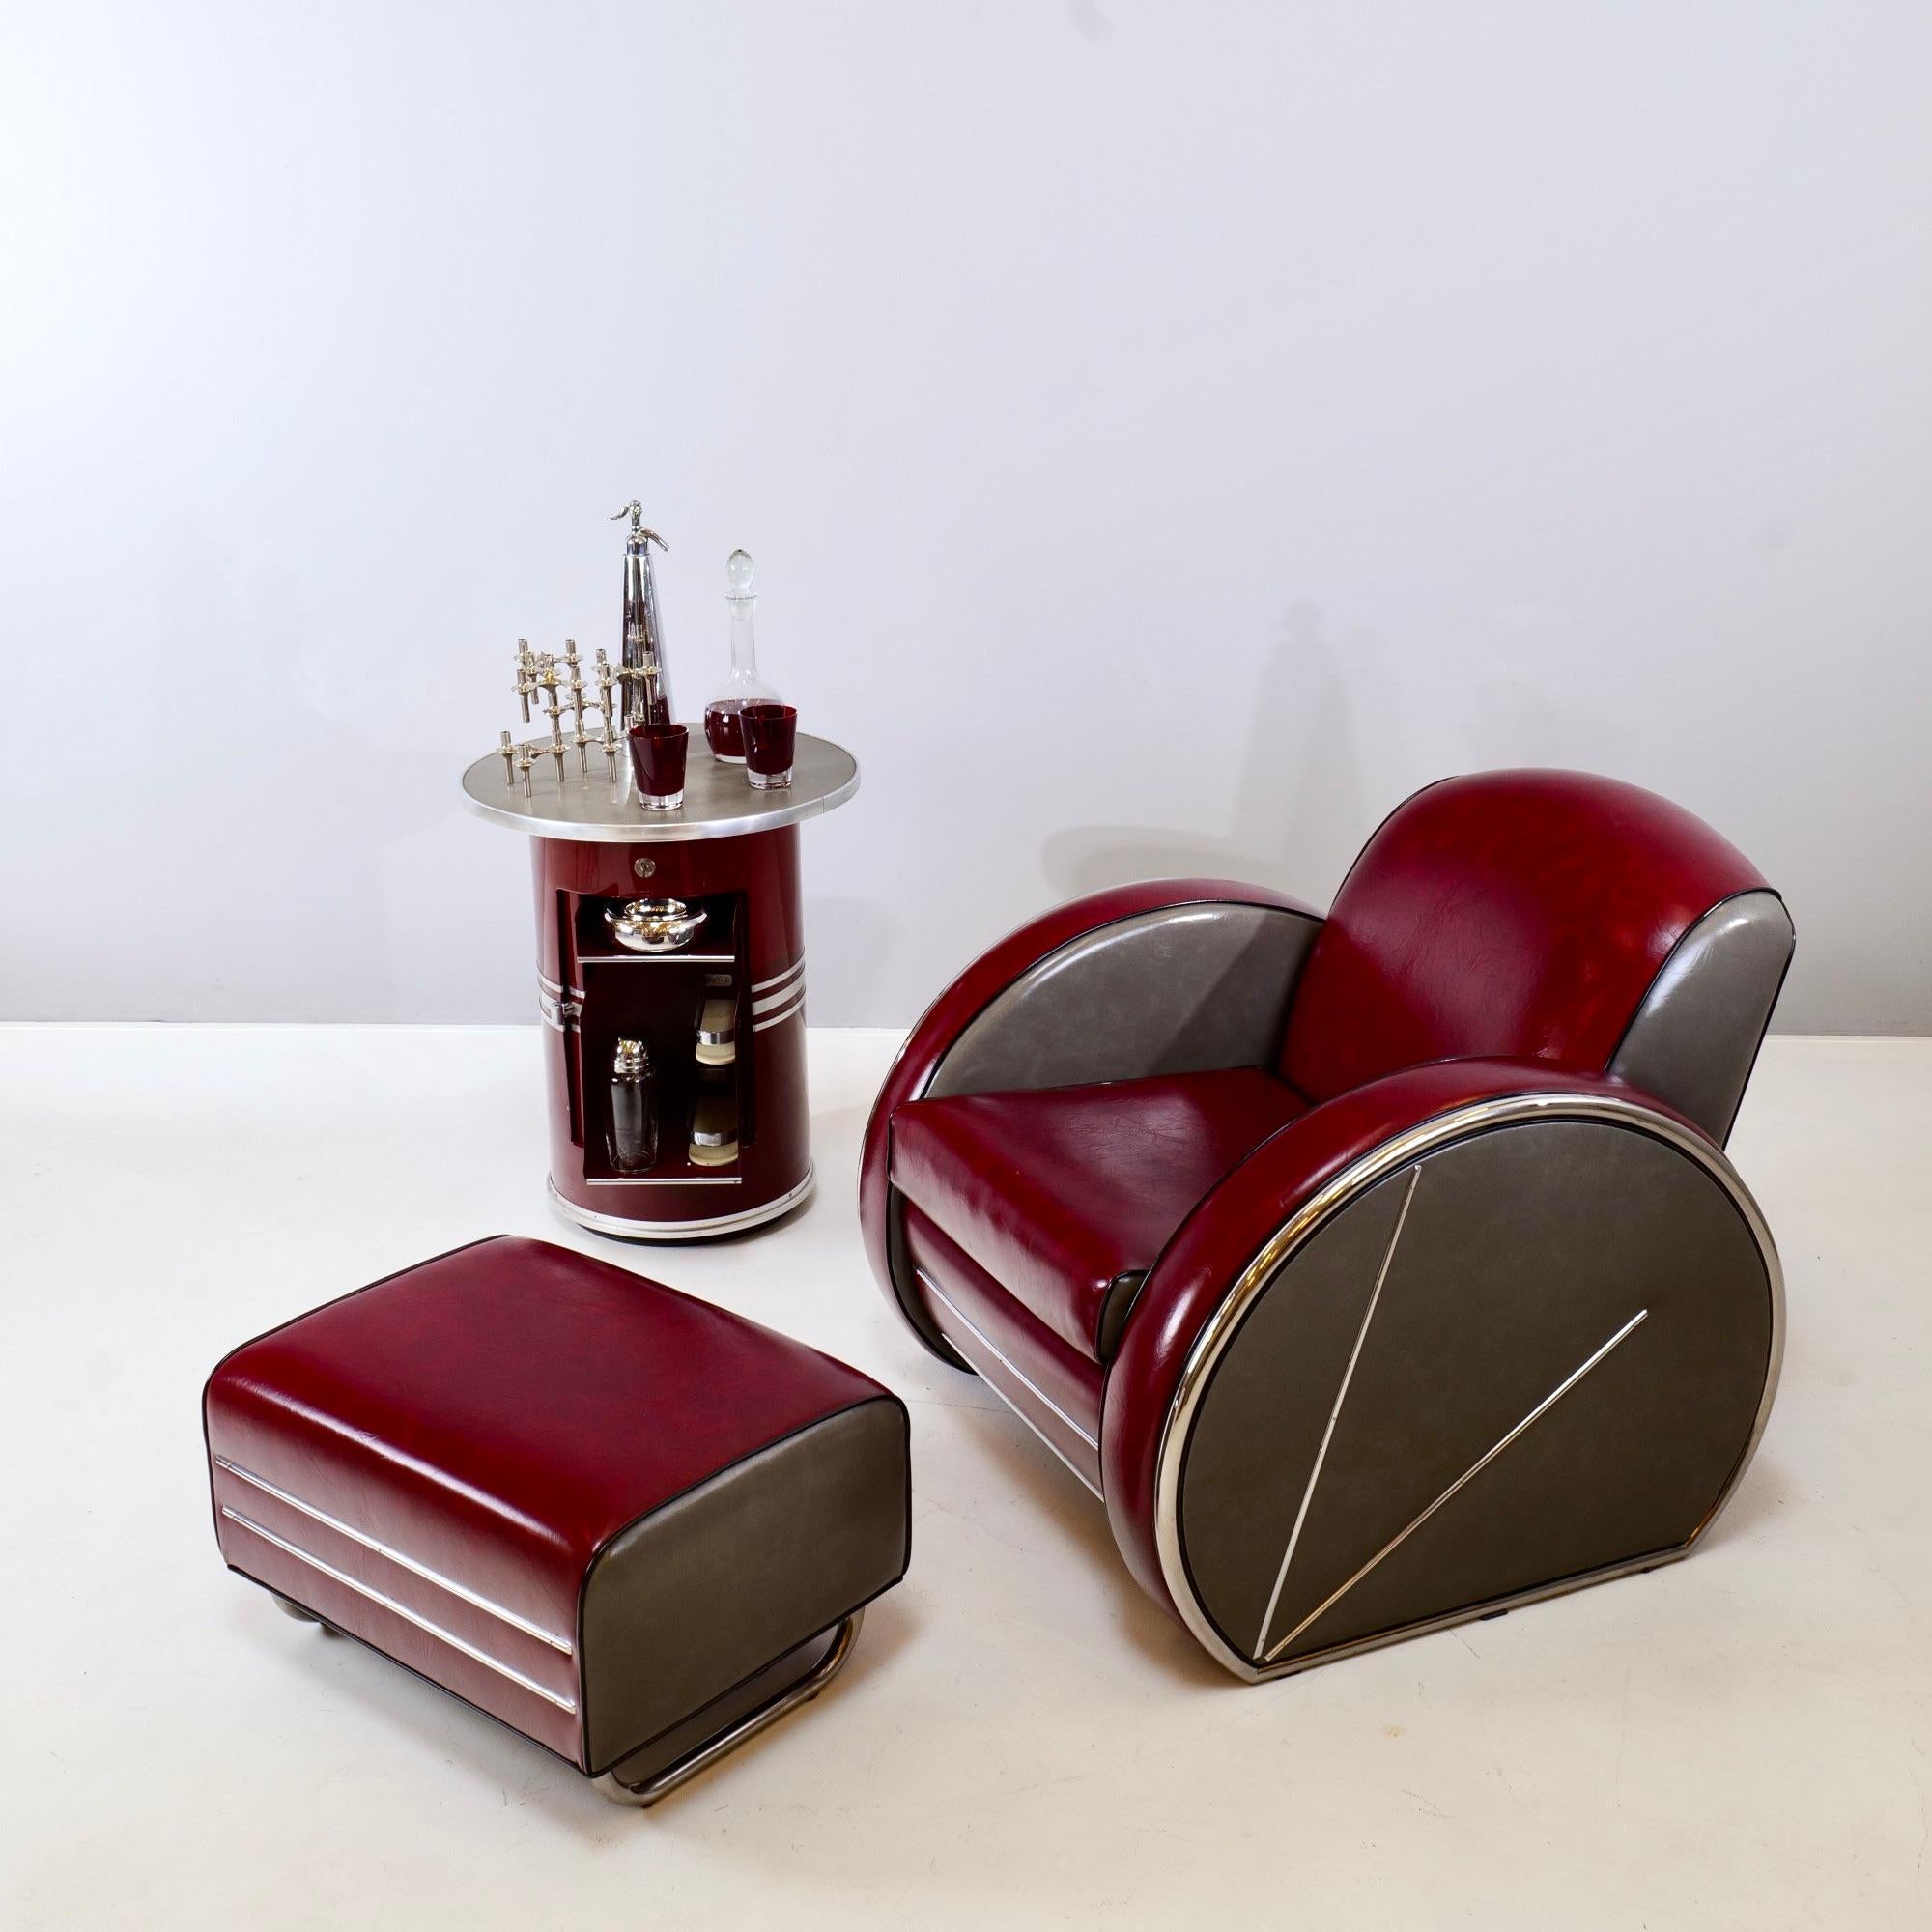 Rare armchair in bordeaux and grey with the iconic streamline shape.
Designed for the Radio City Hall Theater in New York.
The bar on the photos is not included.

This bar is also for sale: 1930's streamline Art Deco br by Mauser Waldeck.

